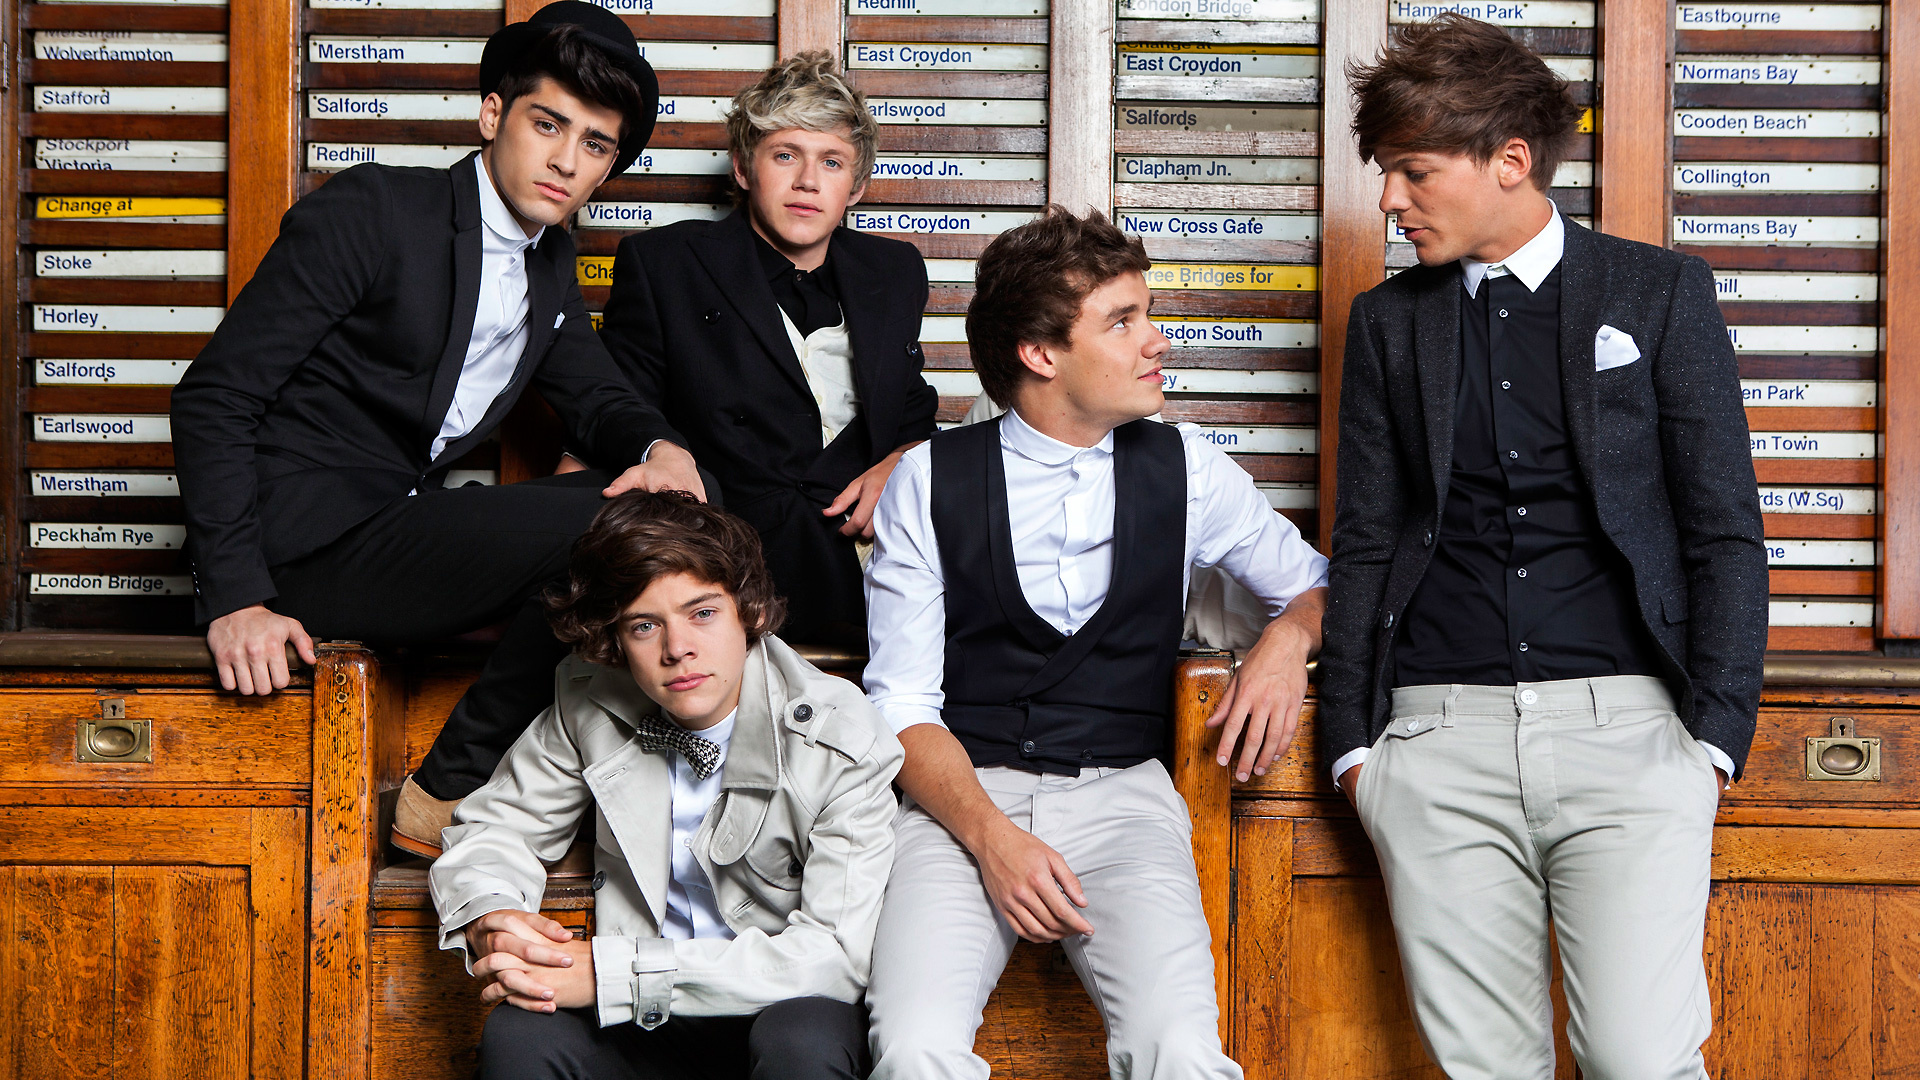 One Direction (Band): 1D, Considered teen idols, Subject to fan hysteria. 1920x1080 Full HD Wallpaper.